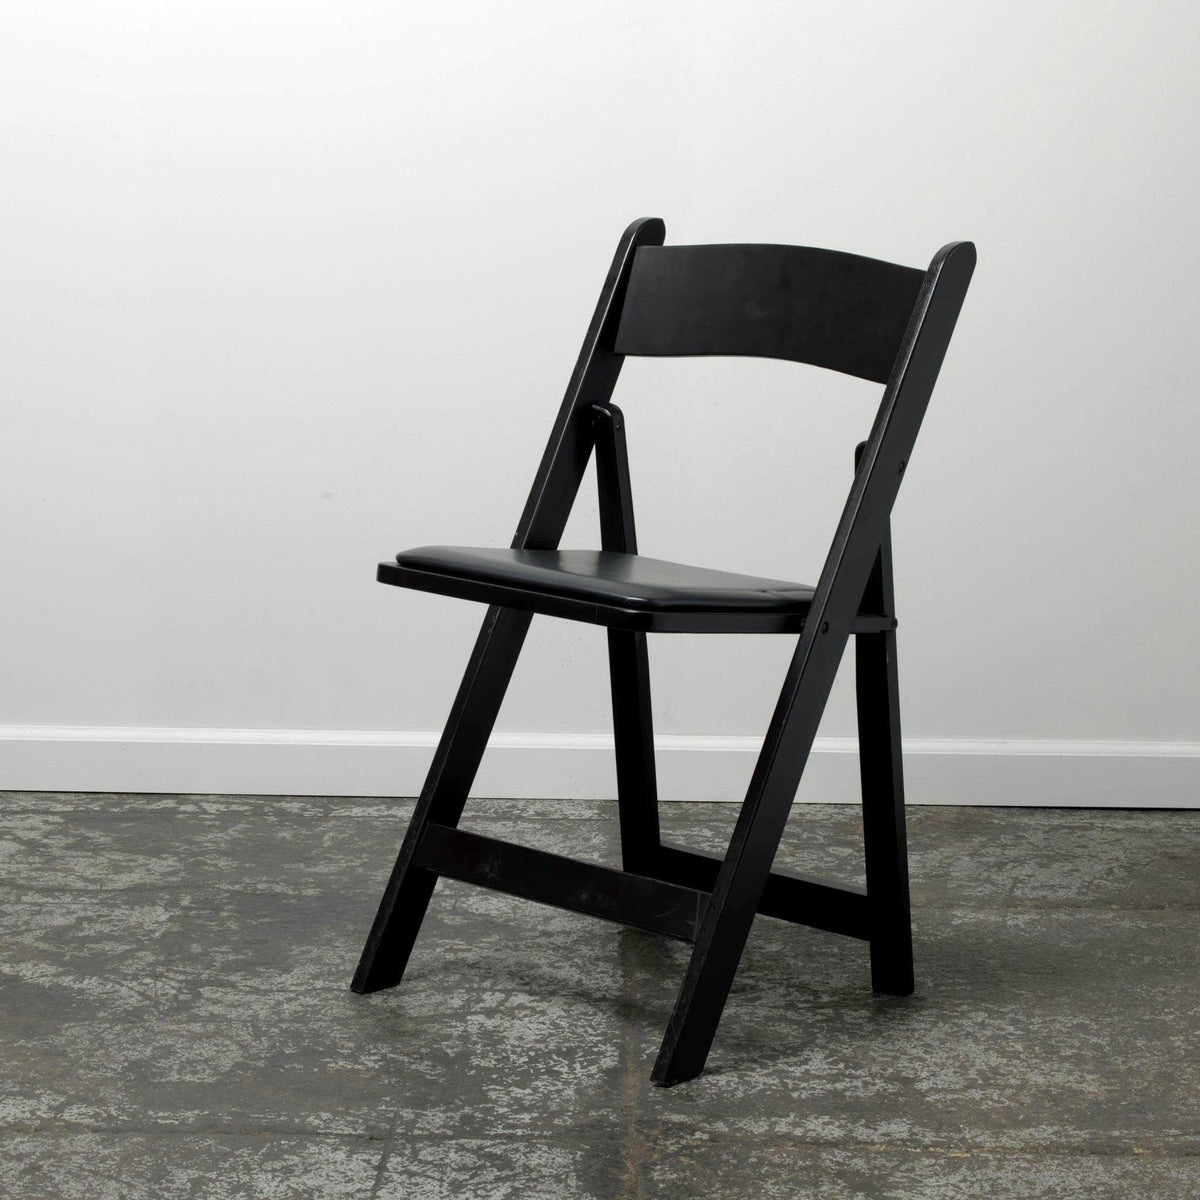 Black Wooden Folding Chairs with Padded Seat